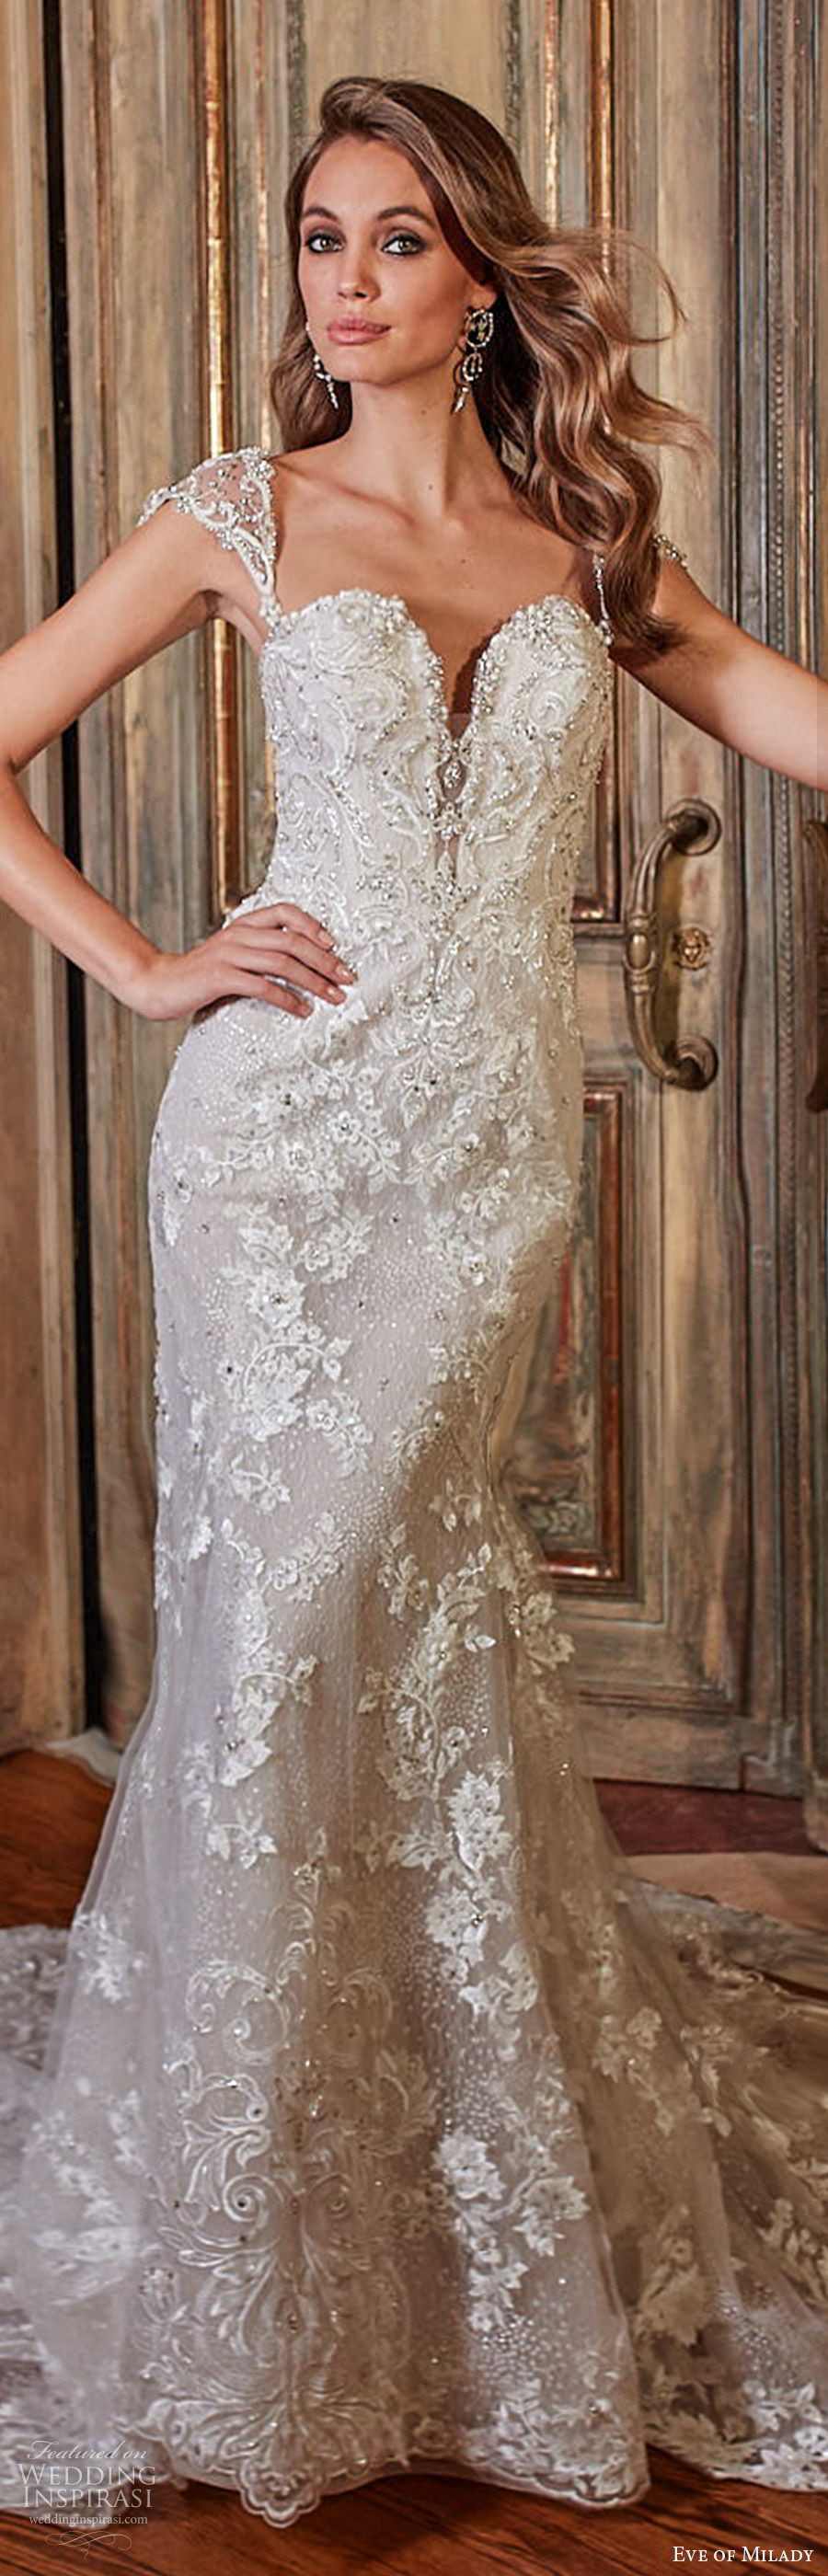 Lovely in lace. #miladys #lacedress #dress #weddingoutfit